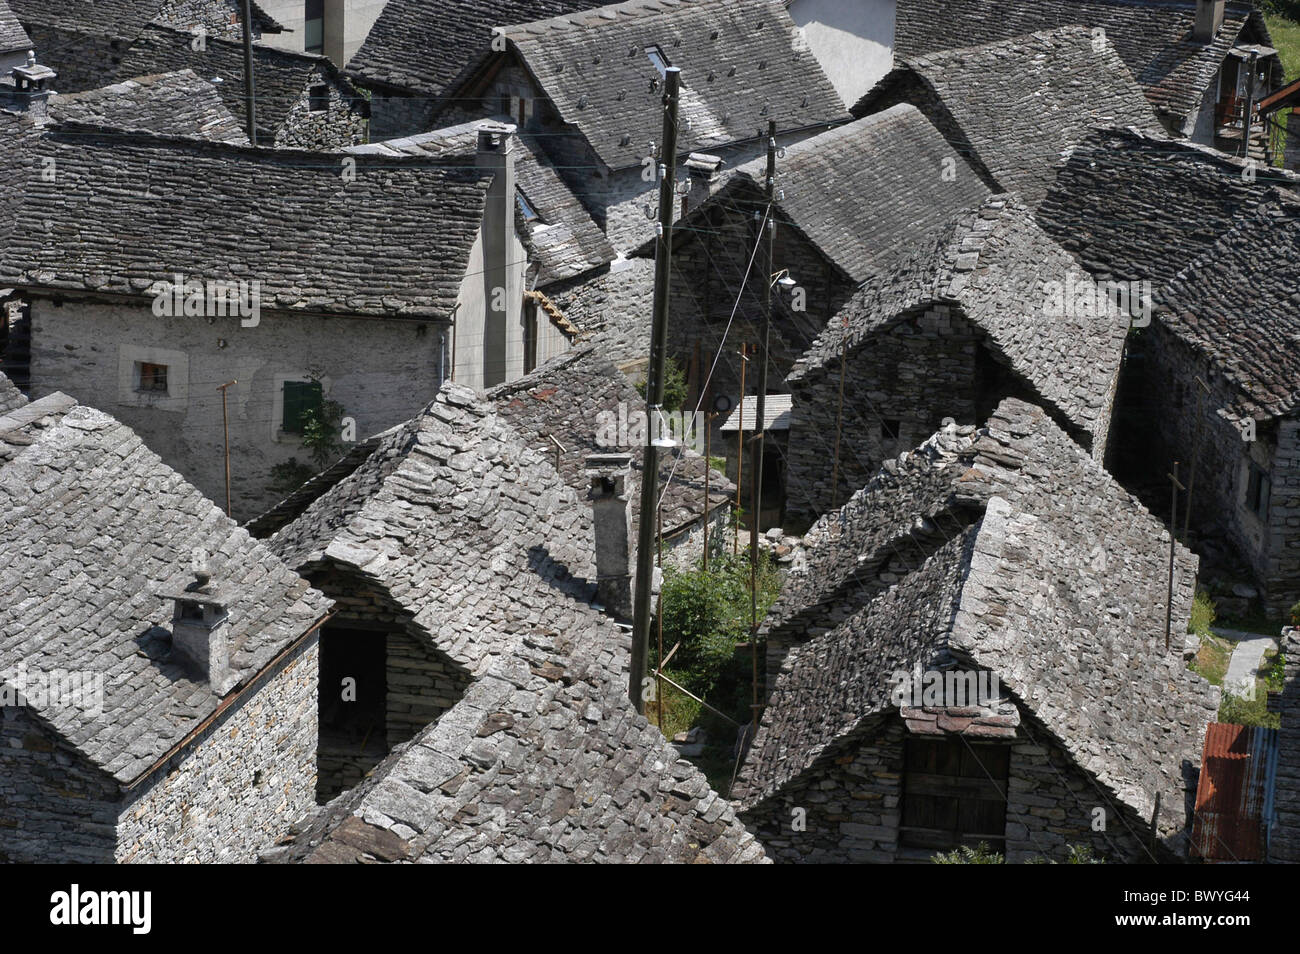 Brione roofs village houses homes Switzerland Europe stone roofs stone bricks Ticino typical Val Verzasca Stock Photo